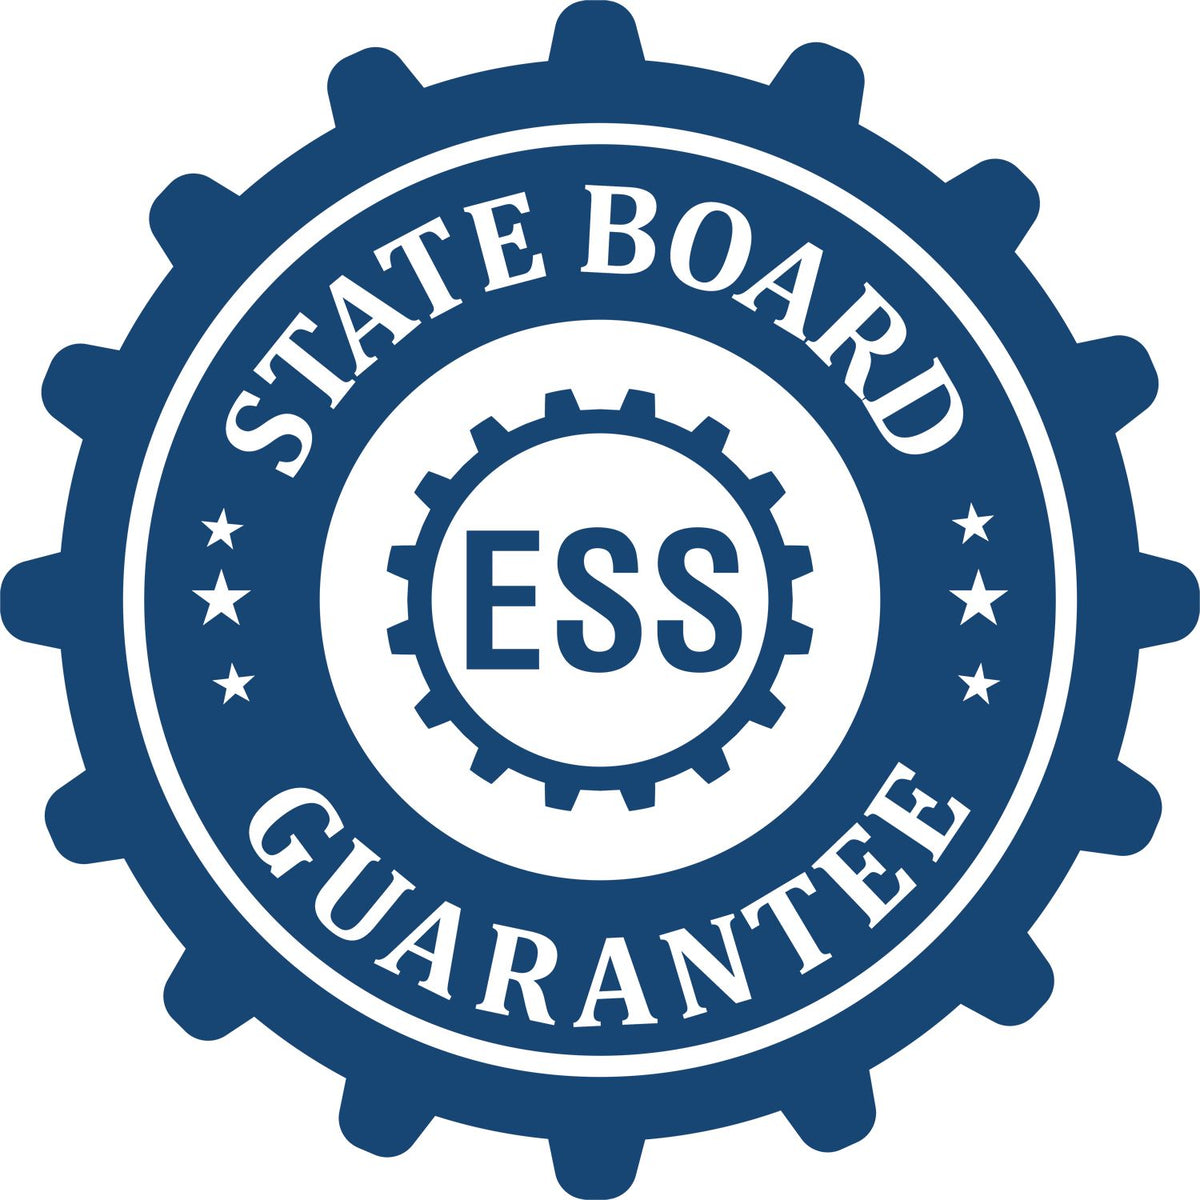 An emblem in a gear shape illustrating a state board guarantee for the Hybrid South Dakota Landscape Architect Seal